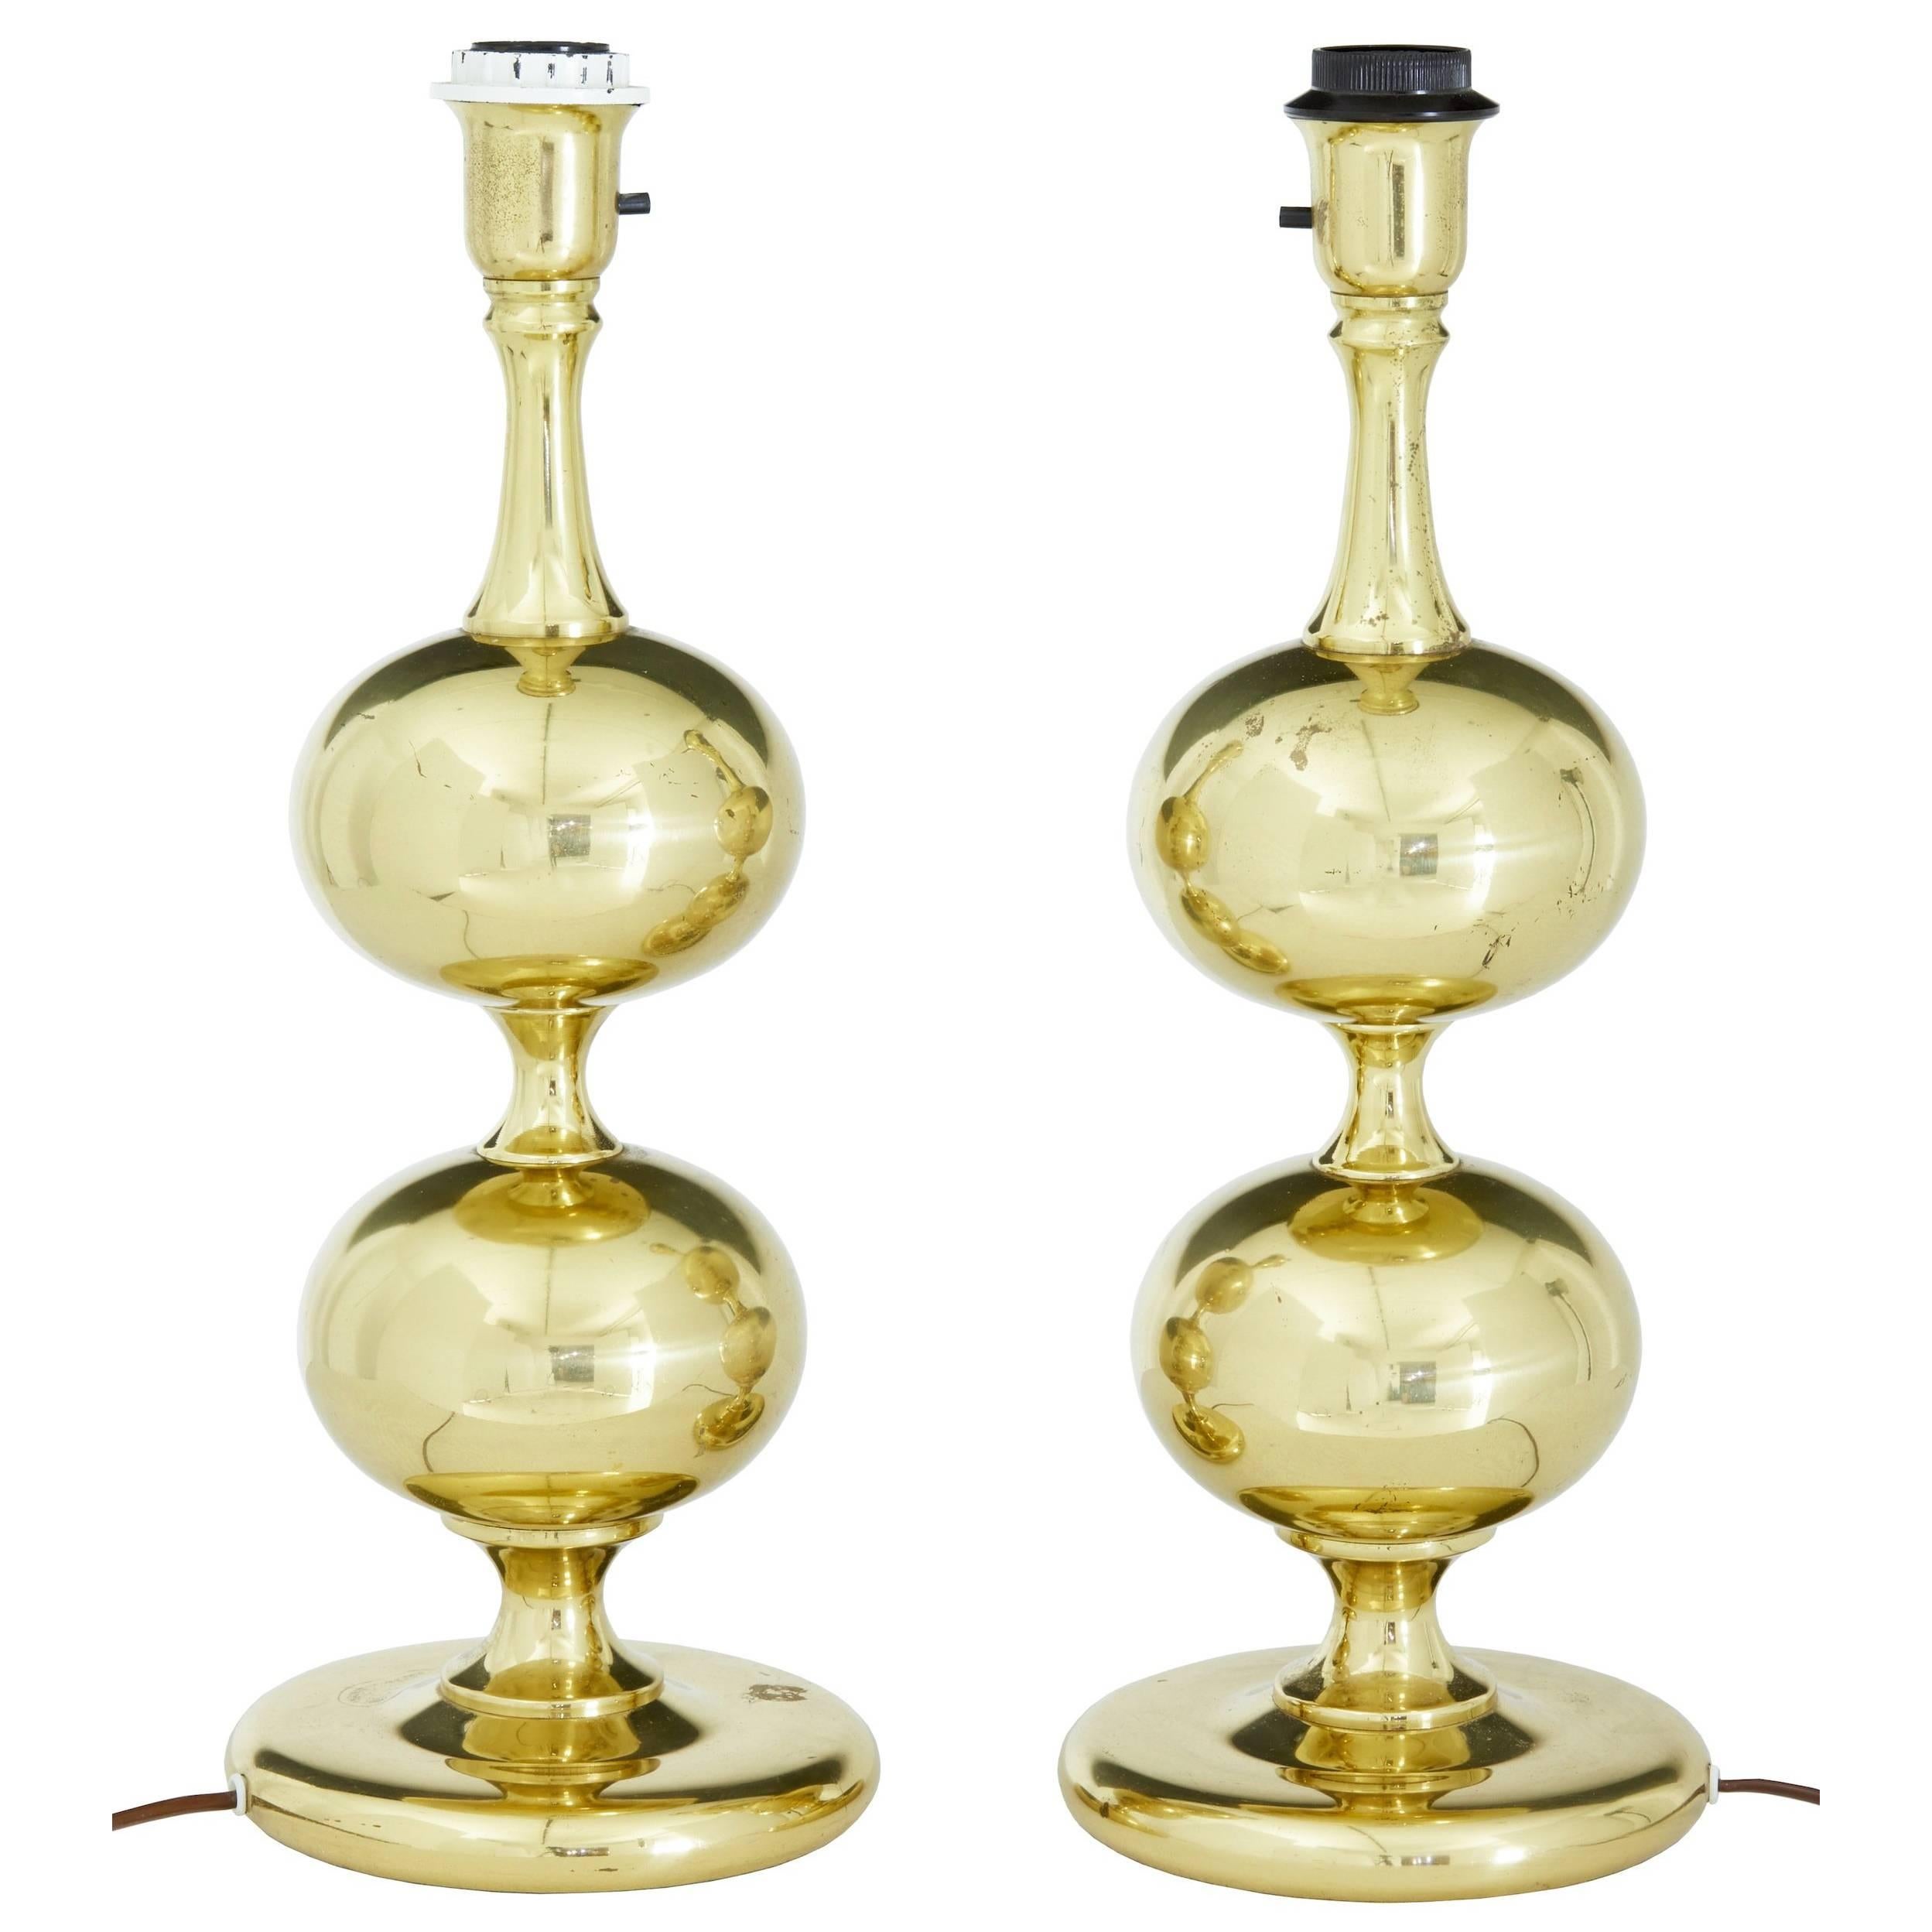 Pair of 1950s brass table lamps by Borens Aktiebolag